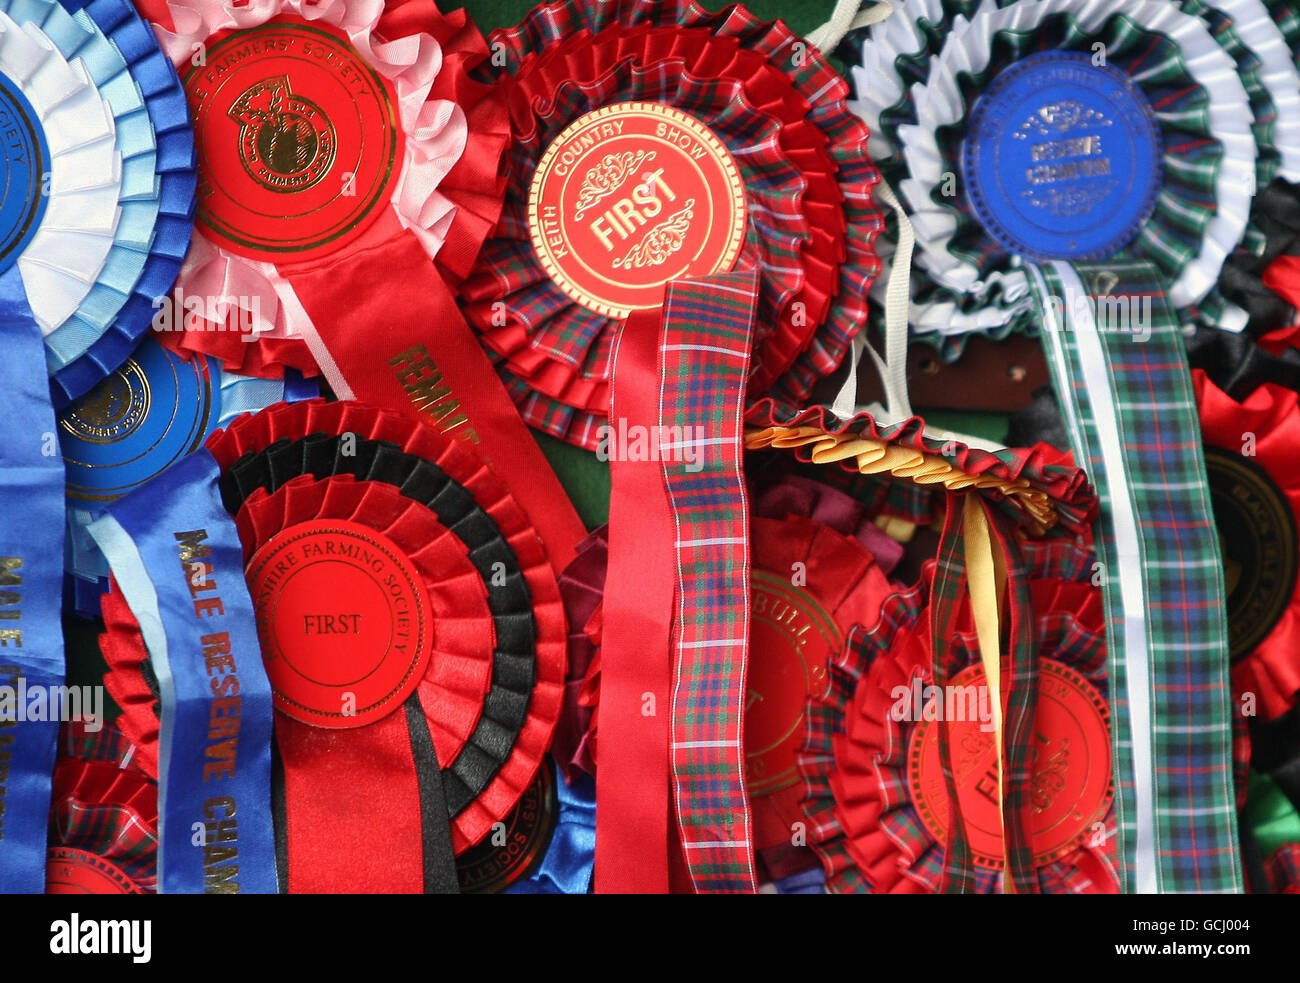 Royal Highland & Agricultural Show Rosettes 1st-3rd 2016 Great display items 